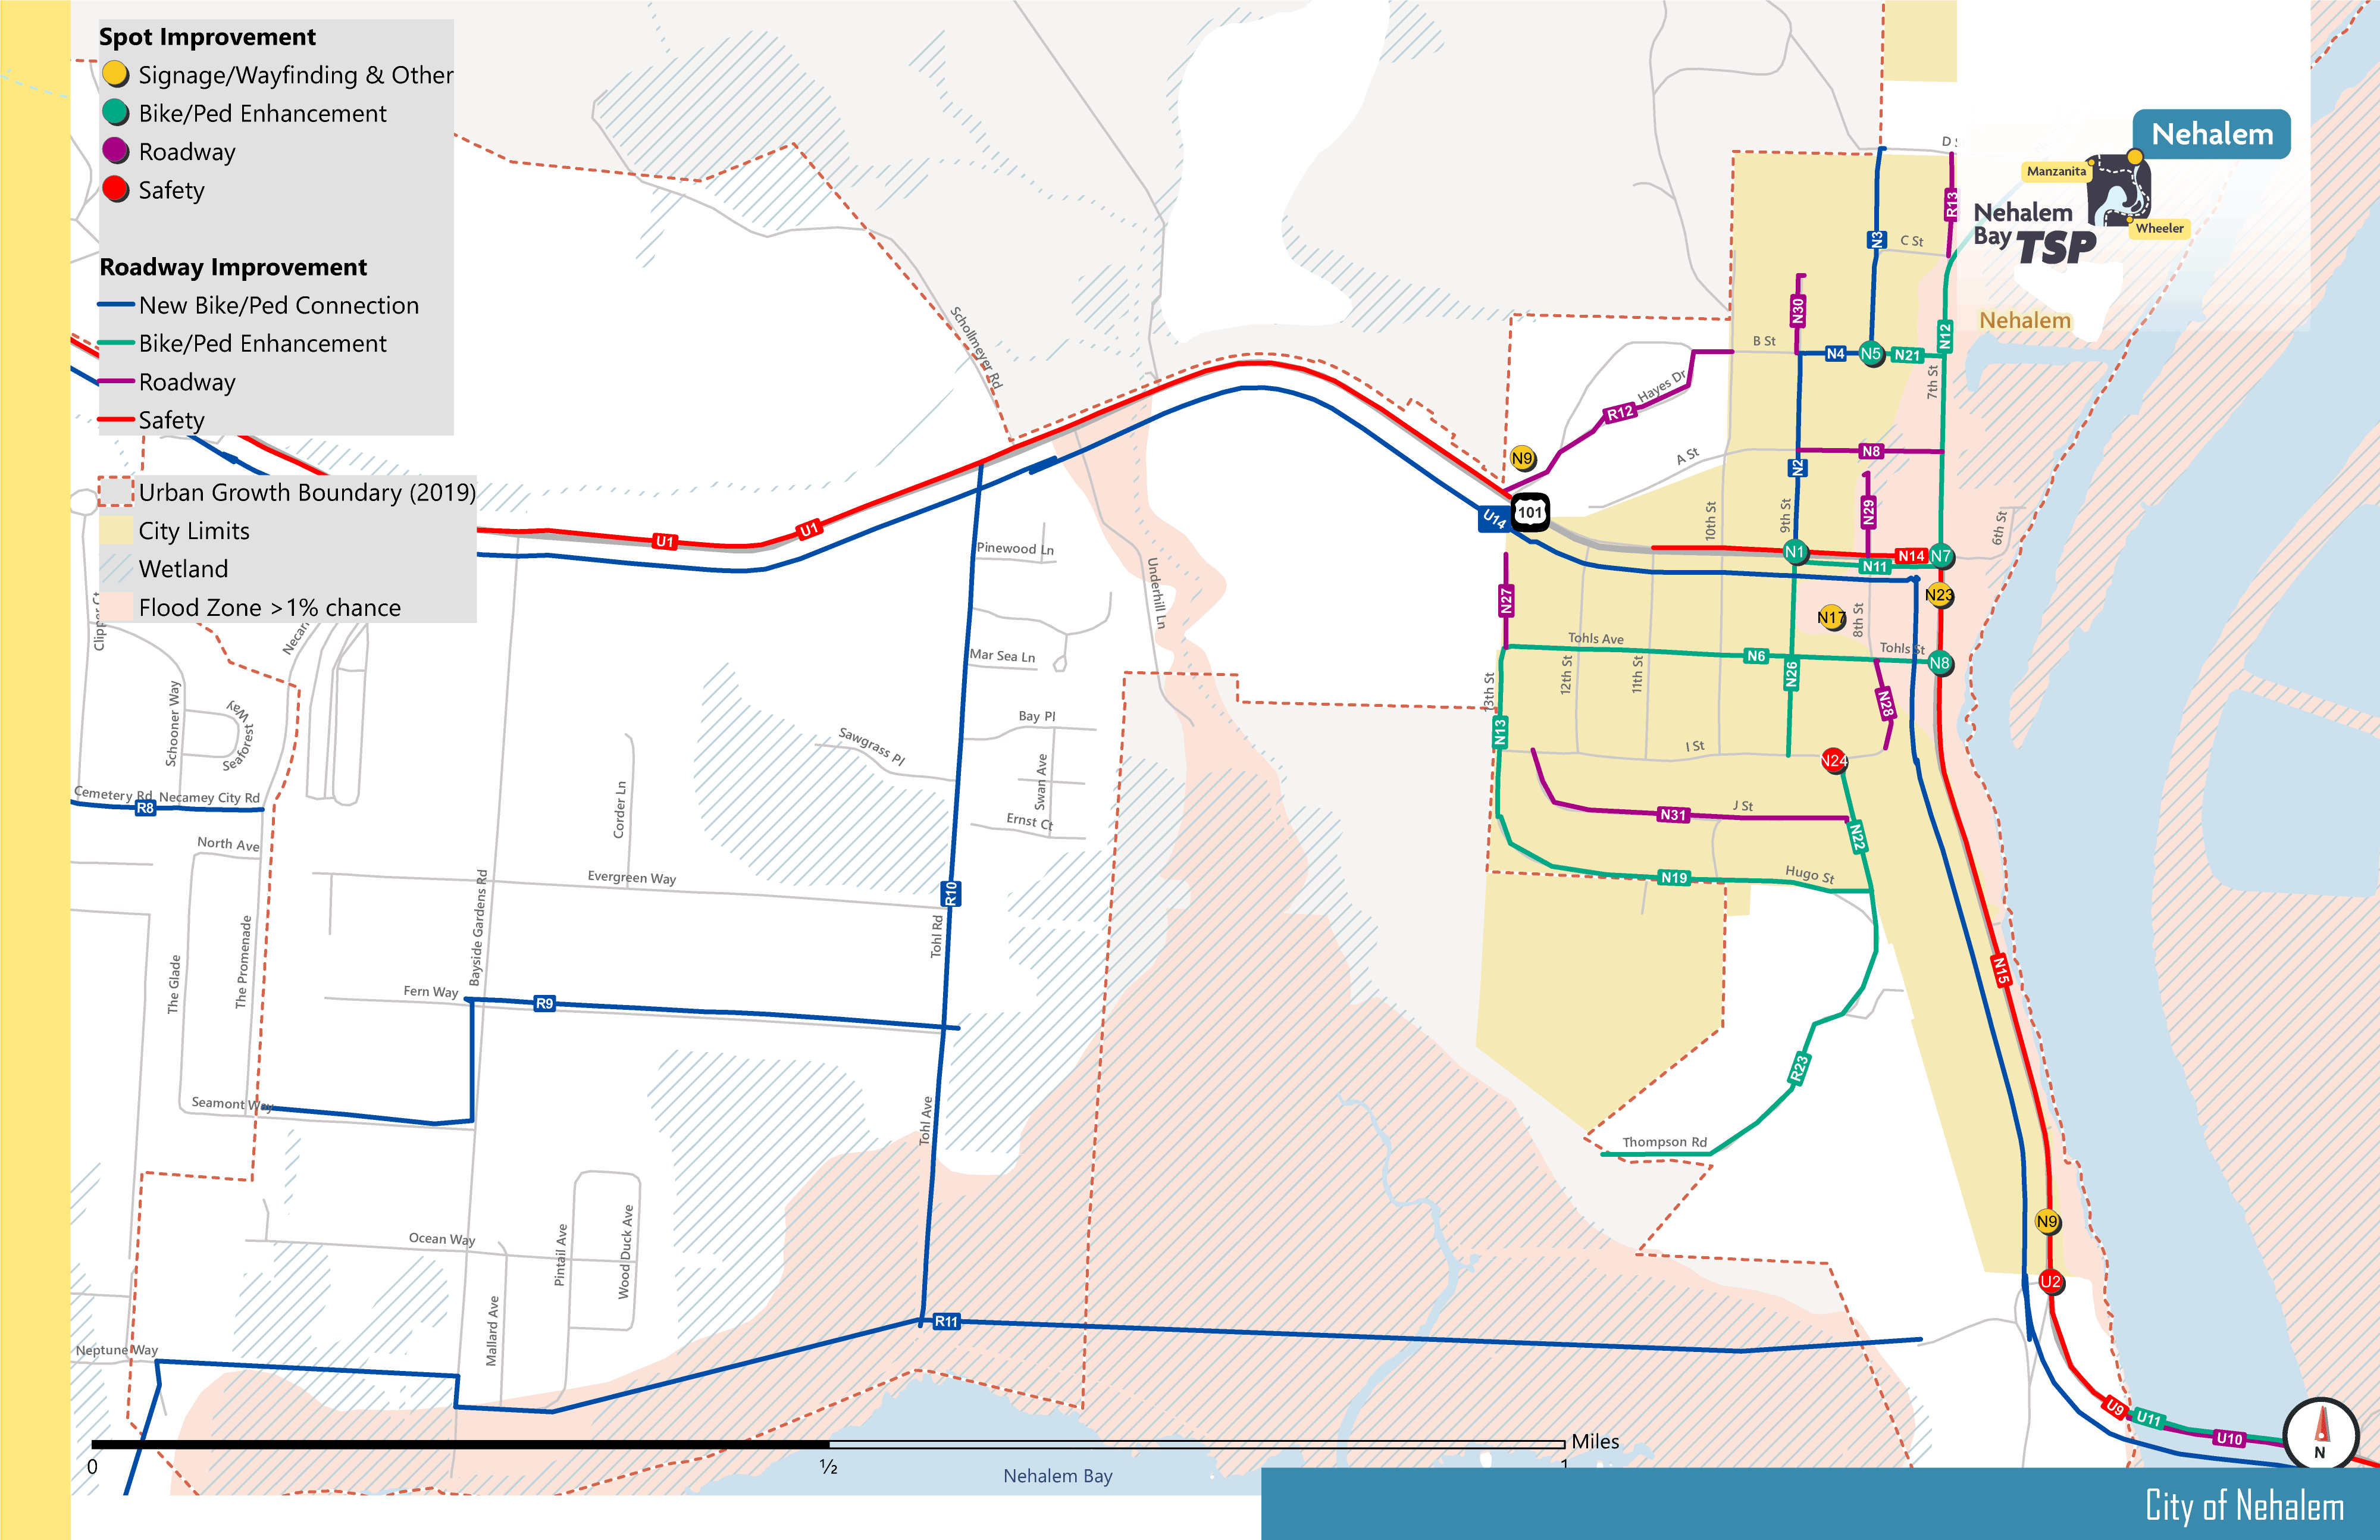 Map showing proposed projects in Nehalem